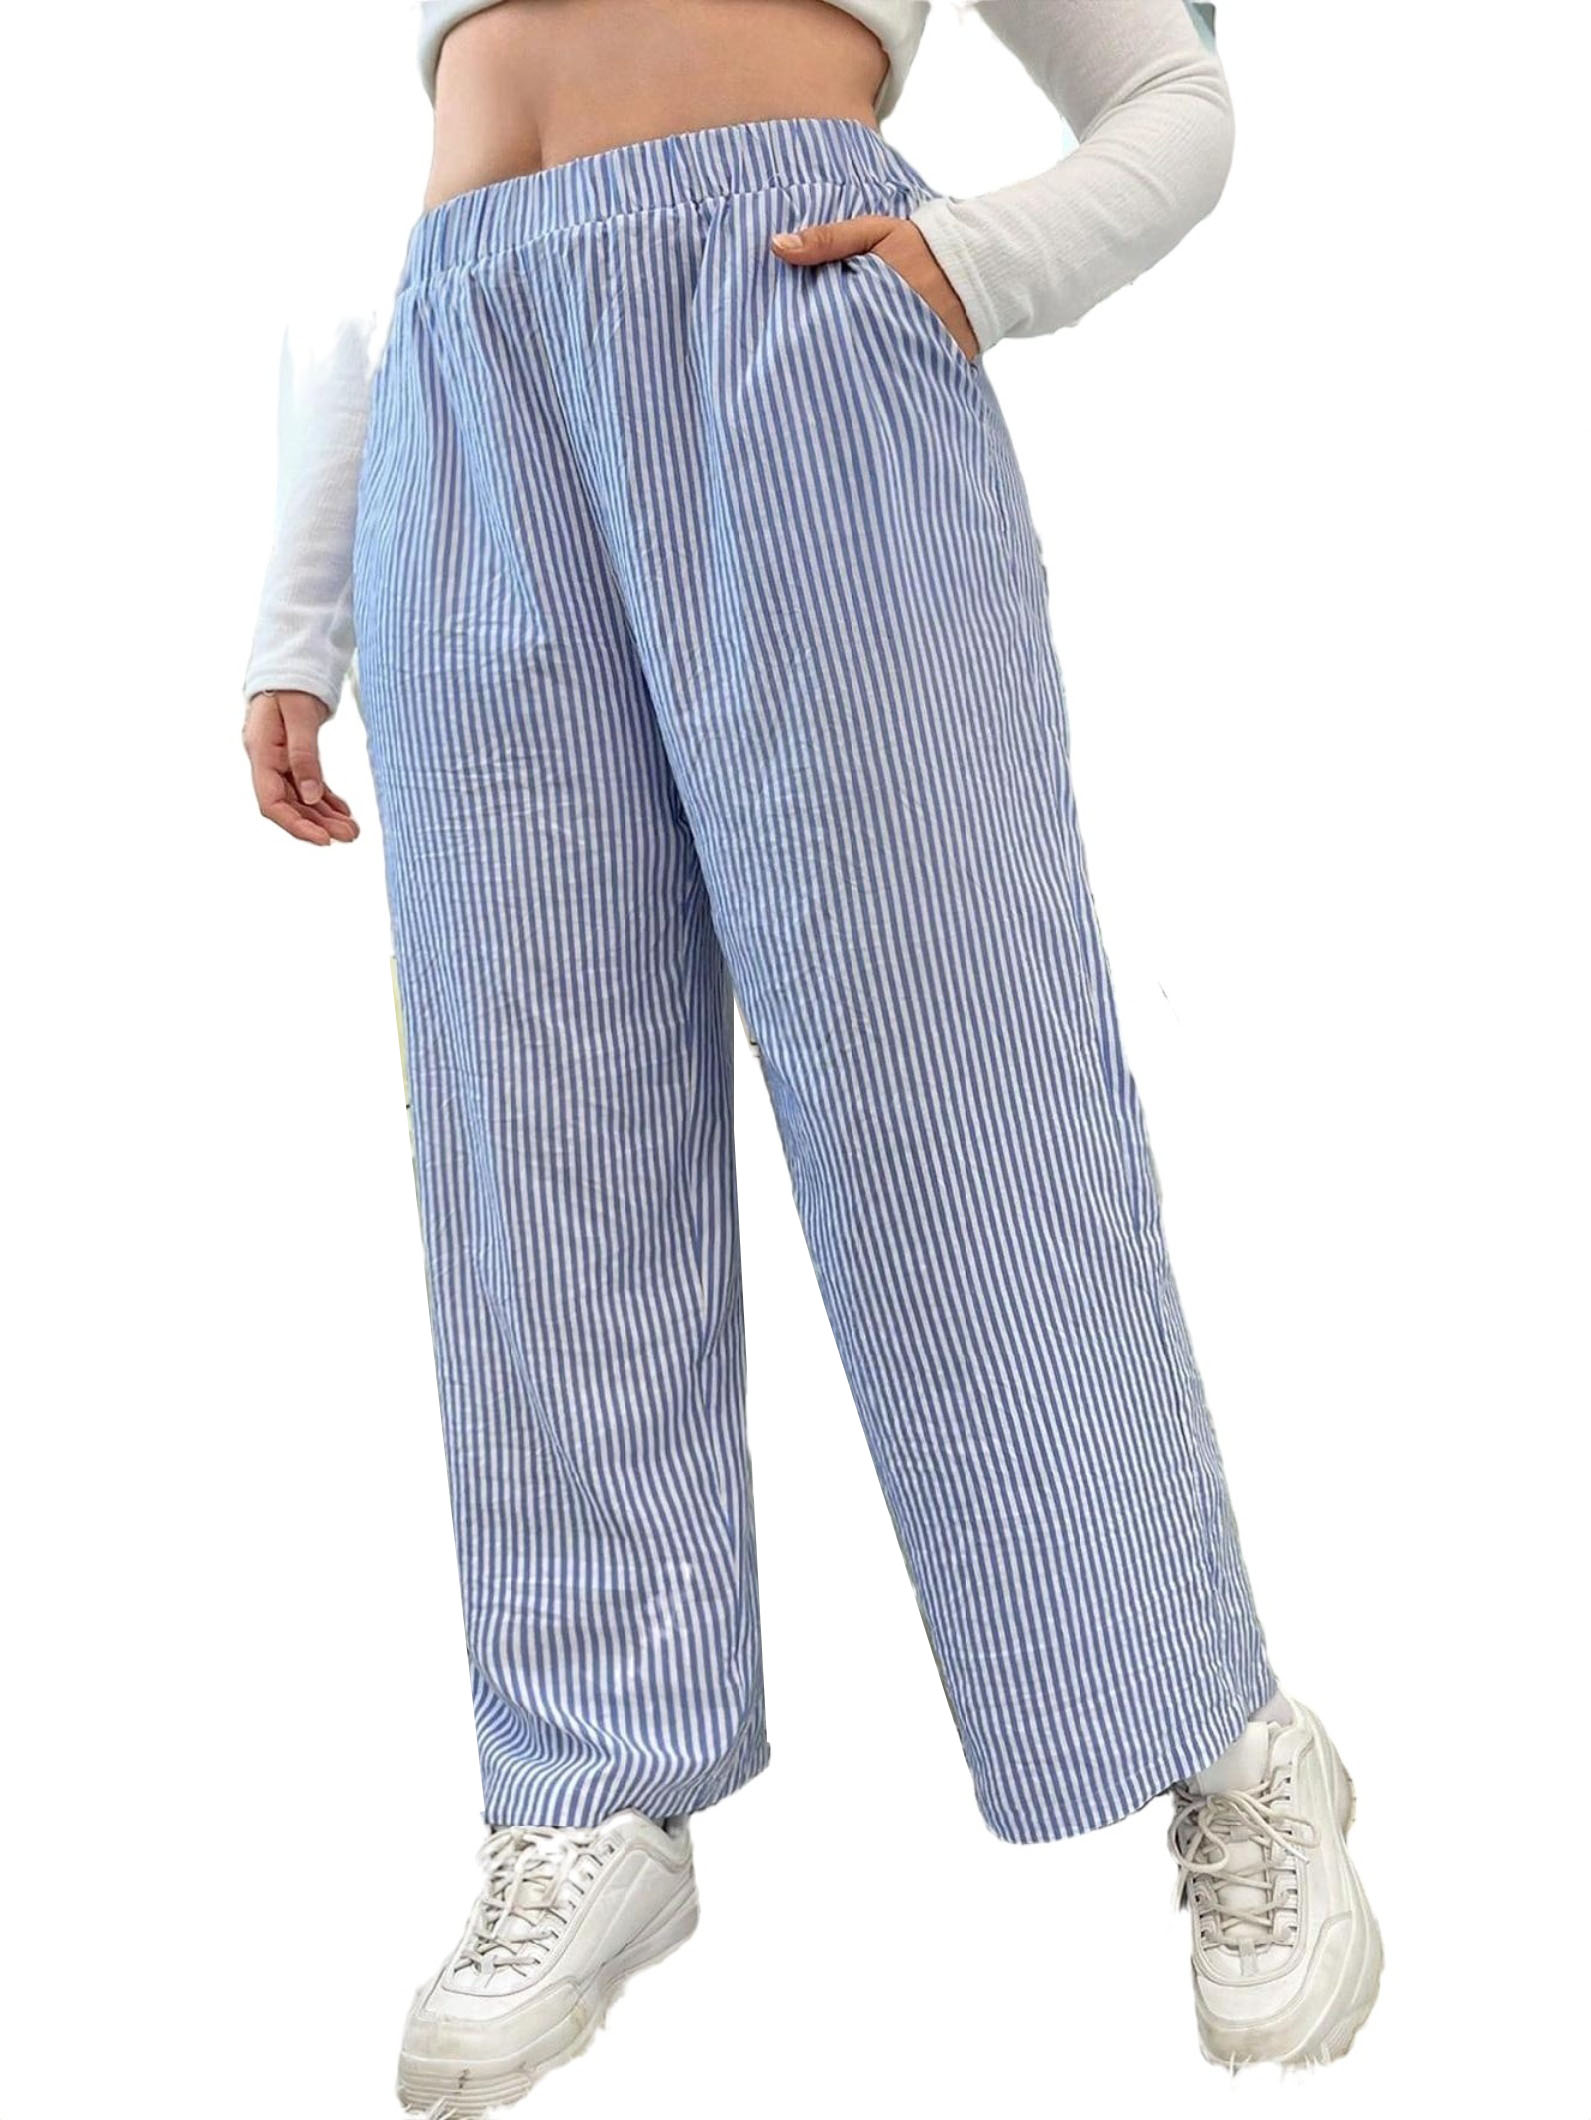 Striped Straight Leg Pants Blue and White Casual Plus Size Pants ...